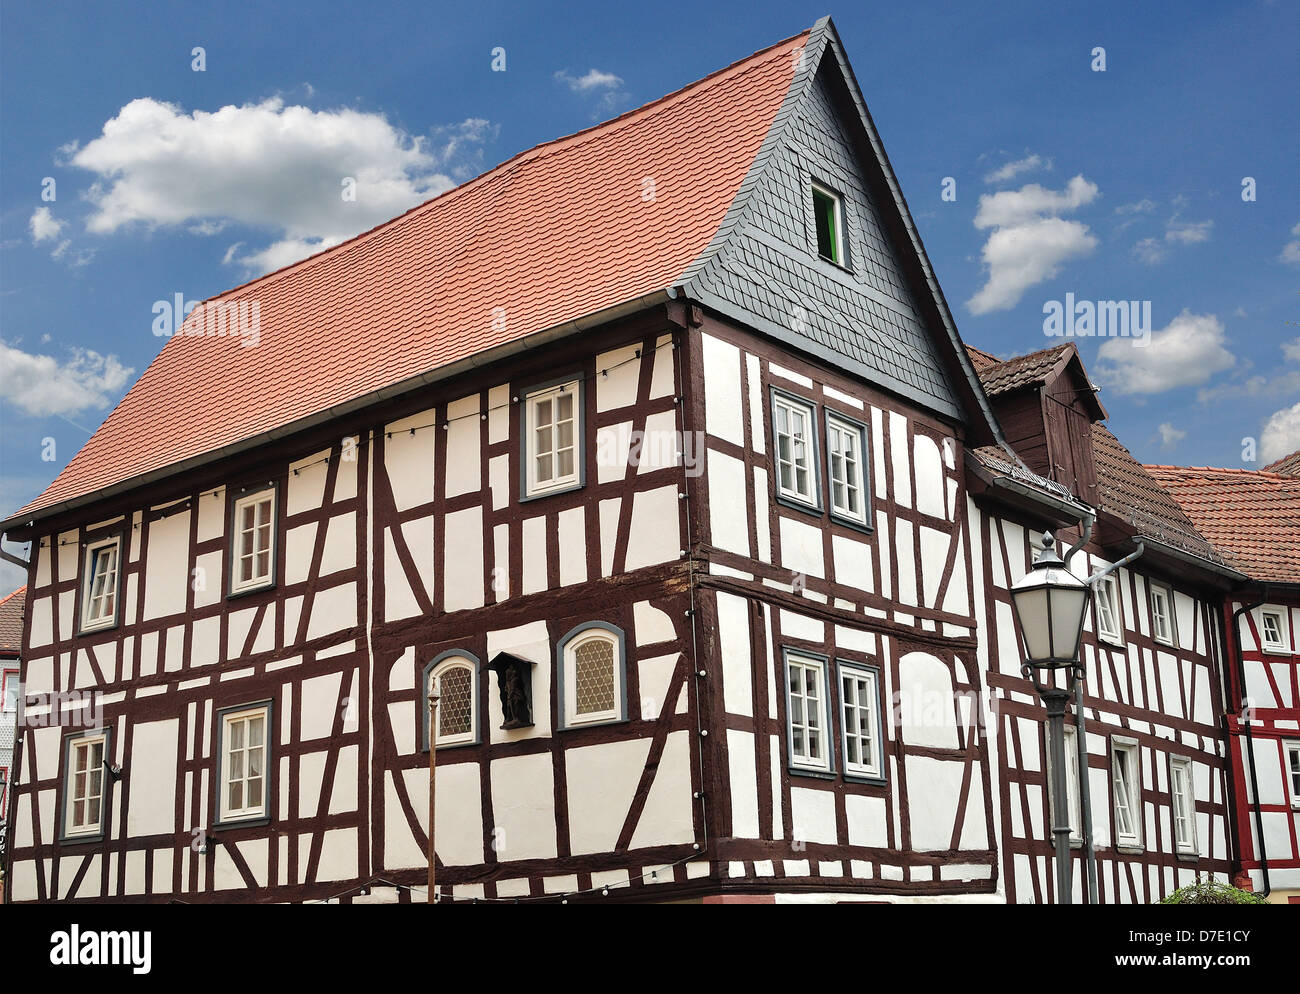 Old building in Germany made from wooden bales. Stock Photo